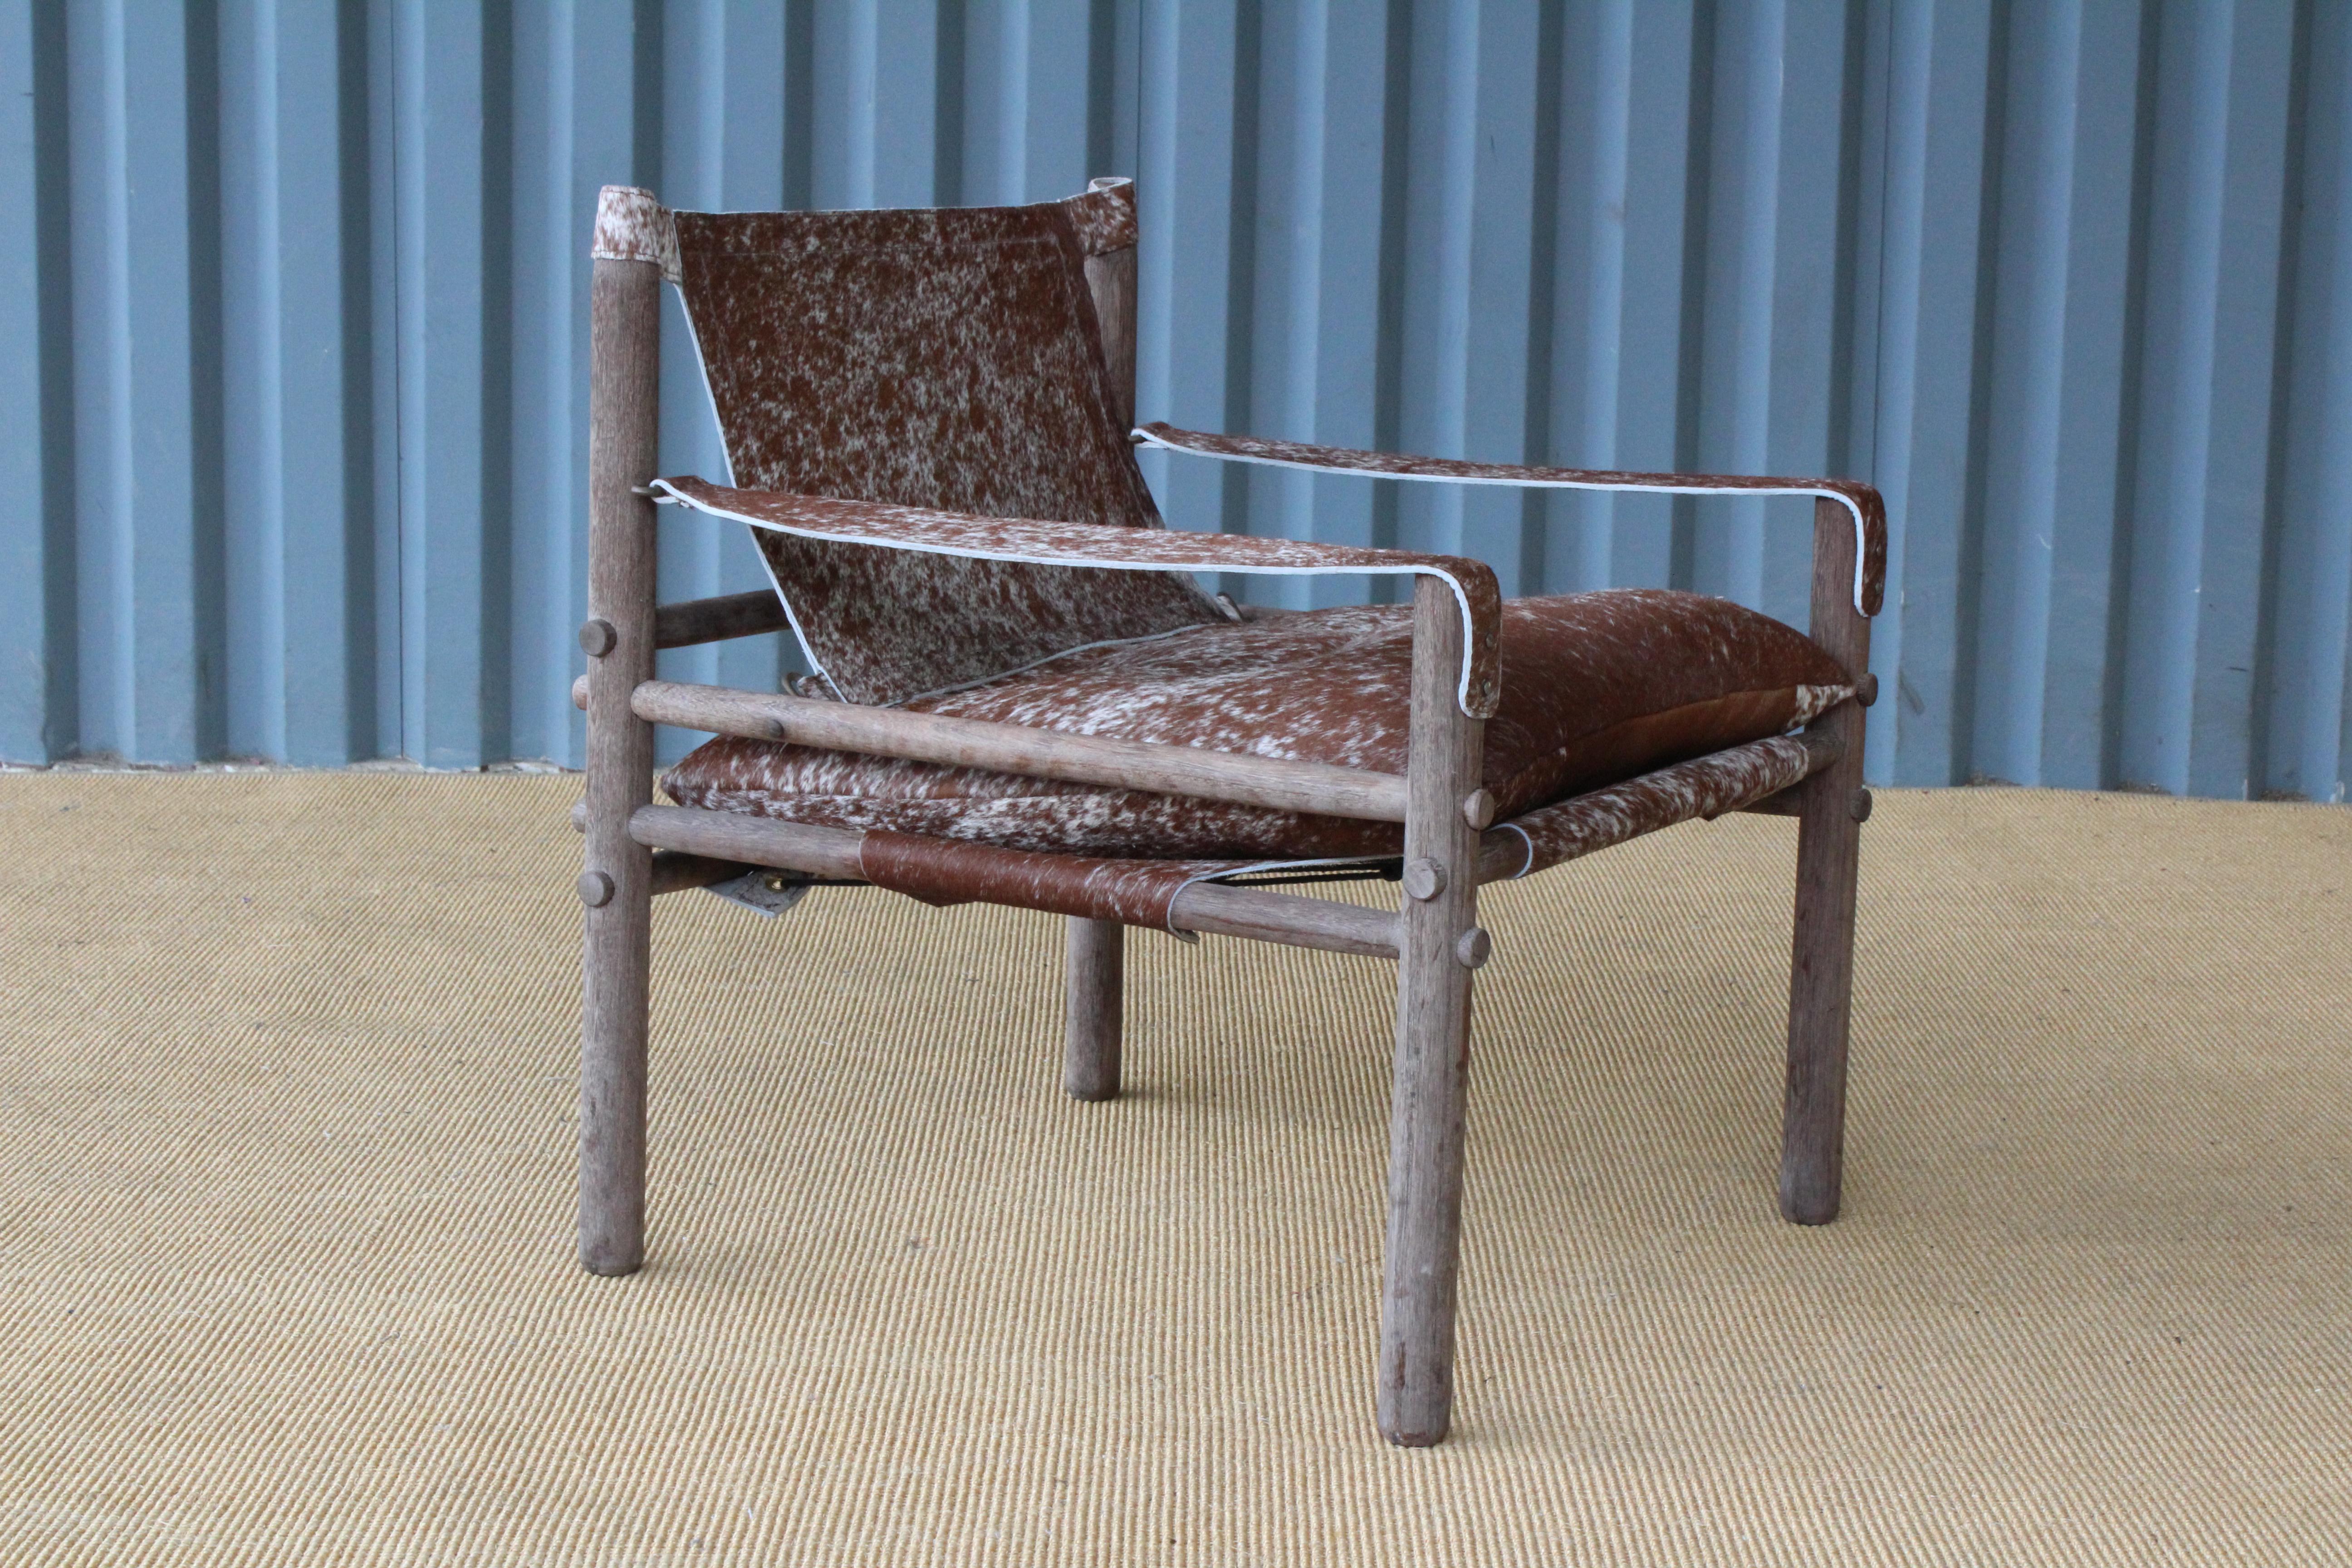 Rosewood safari 'Sirocco' chair designed by Arne Norell and made in Sweden, circa 1960s. Features new cowhide slings. Original patina on the rosewood frame.